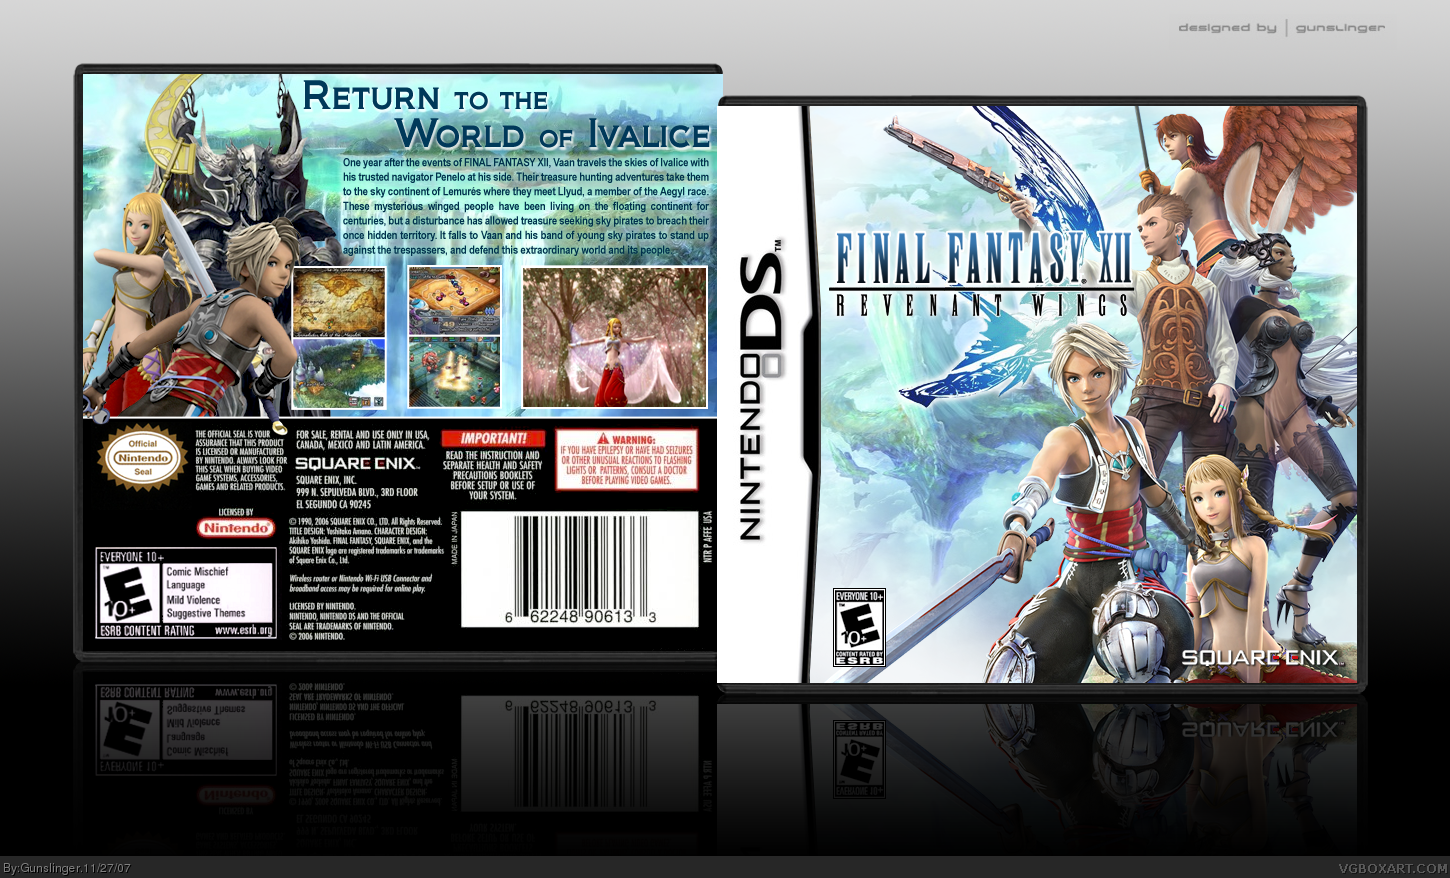 Final Fantasy XII: Revenant Wings box cover